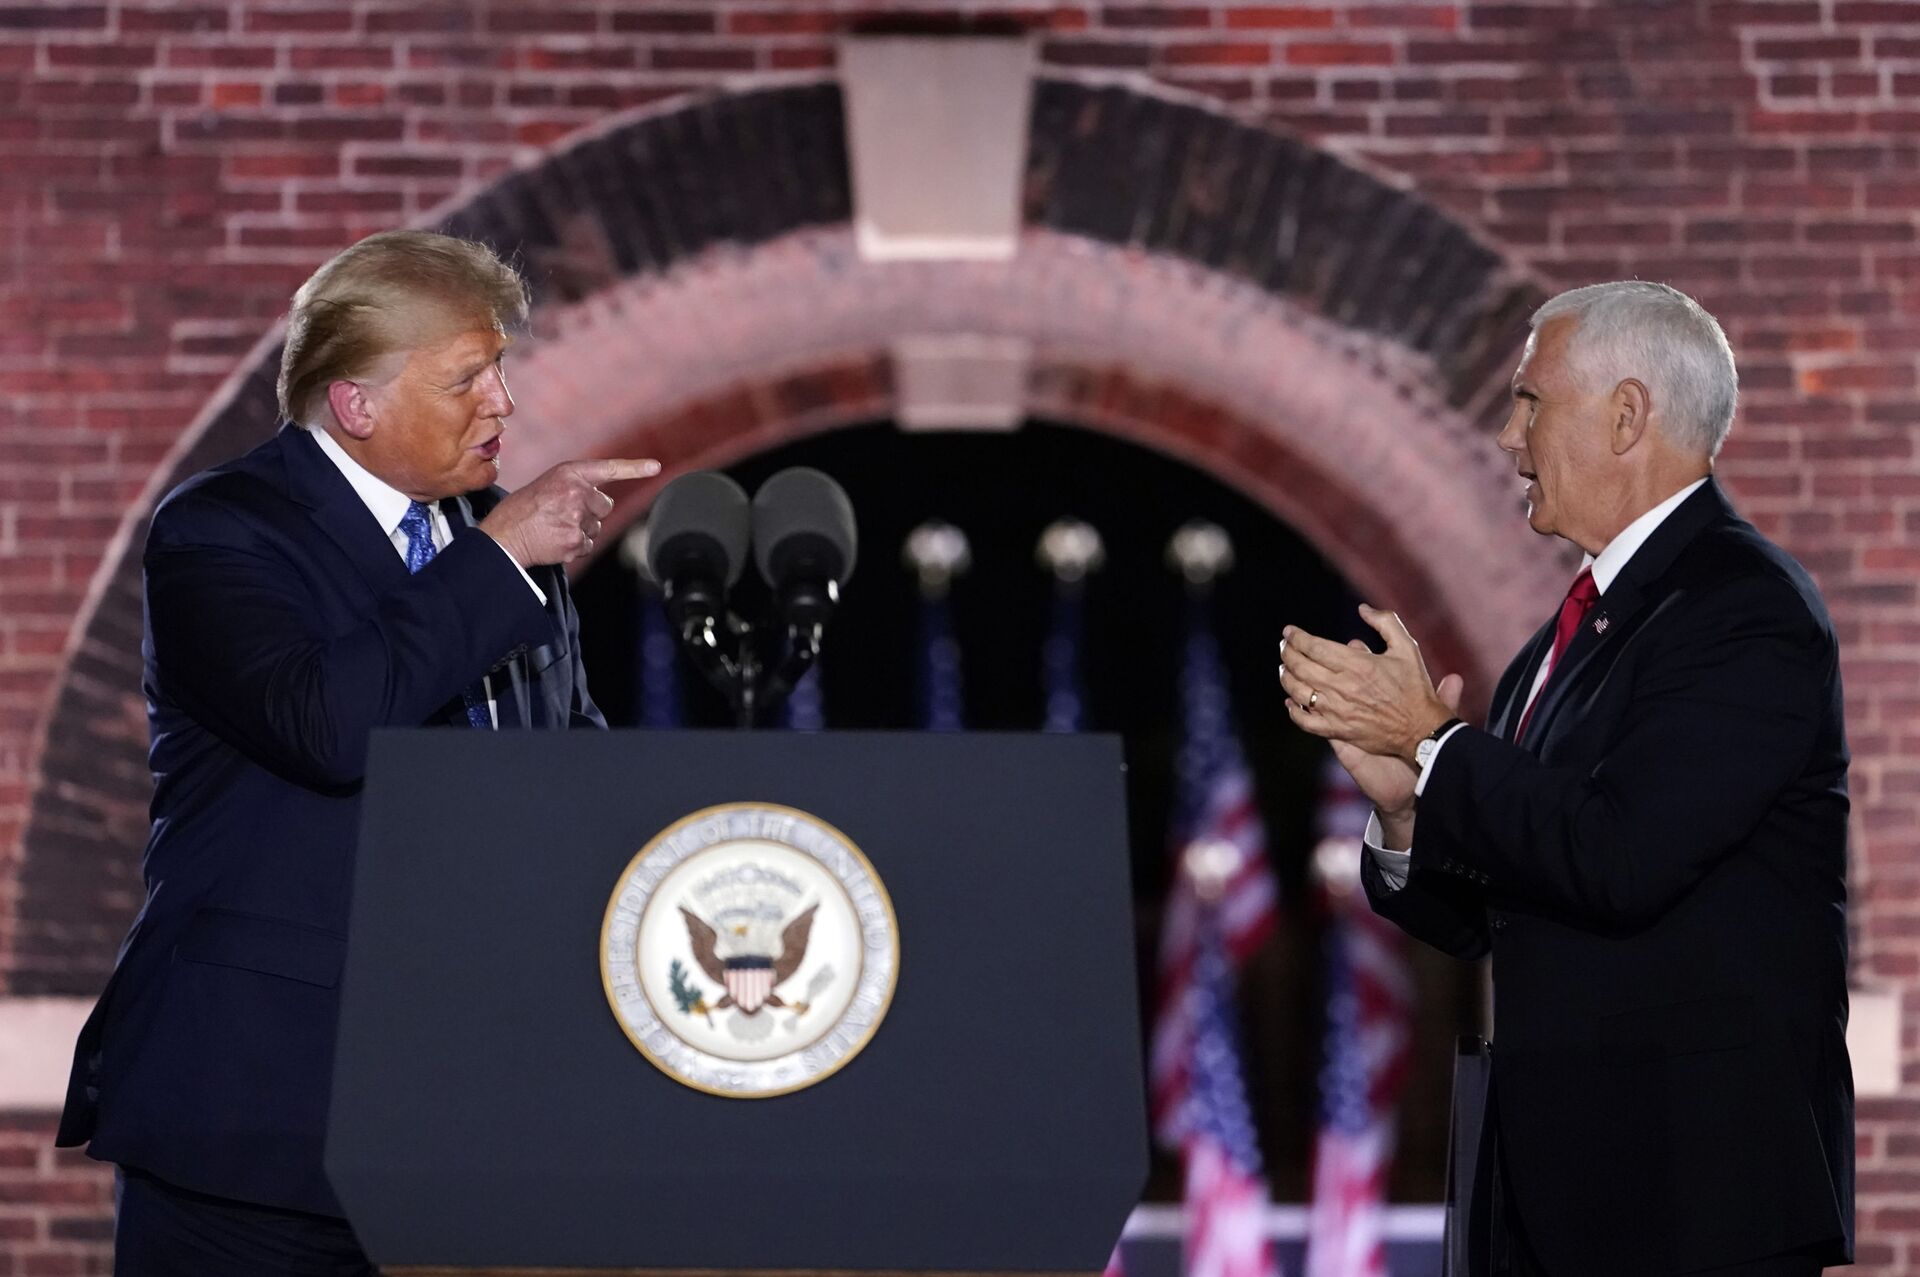 President Donald Trump joins Vice President Mike Pence on stage after Pence spoke on the third day of the Republican National Convention at Fort McHenry National Monument and Historic Shrine in Baltimore, Wednesday, Aug. 26, 2020 - Sputnik International, 1920, 06.01.2022